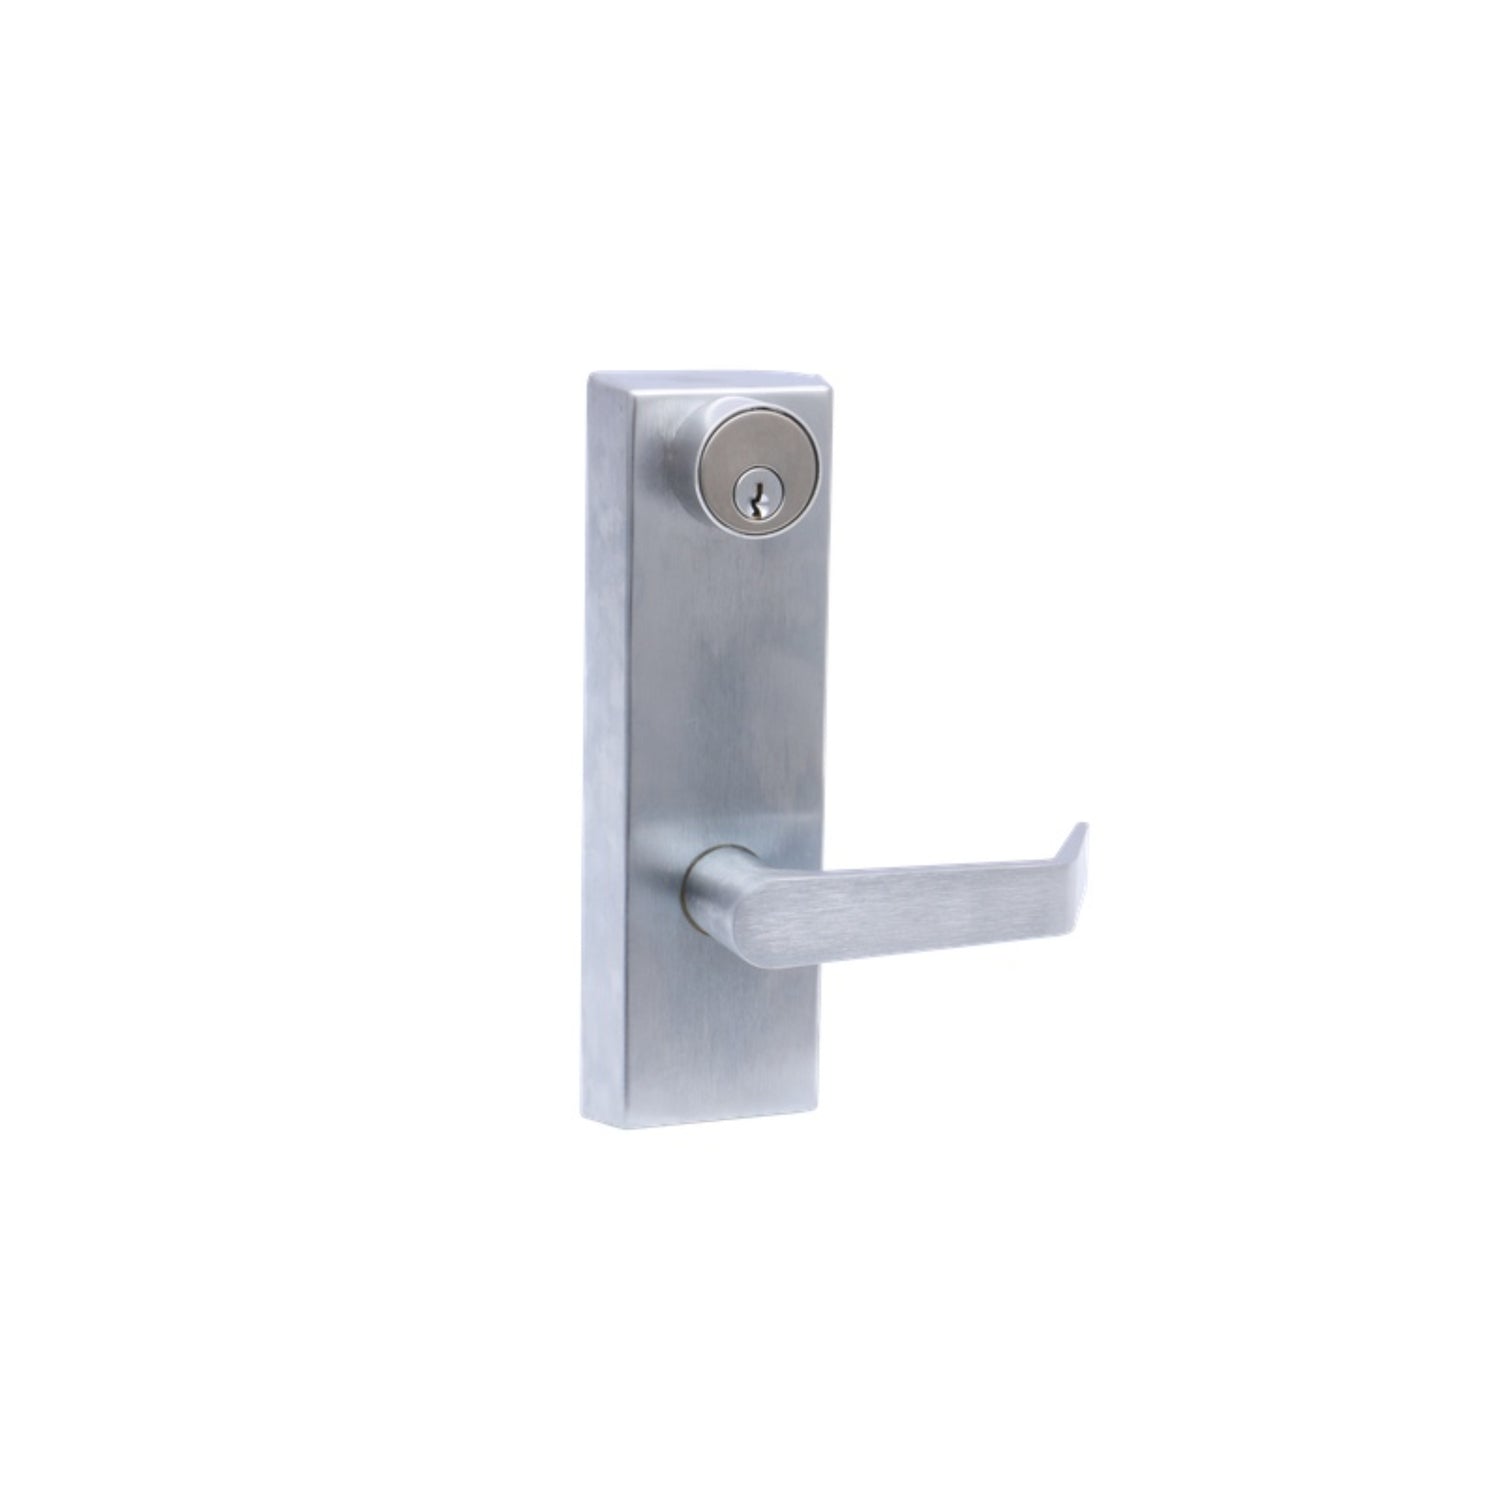 Brushed Chrome Commercial Entry Escutcheon Lever Trim for Panic Exit Device